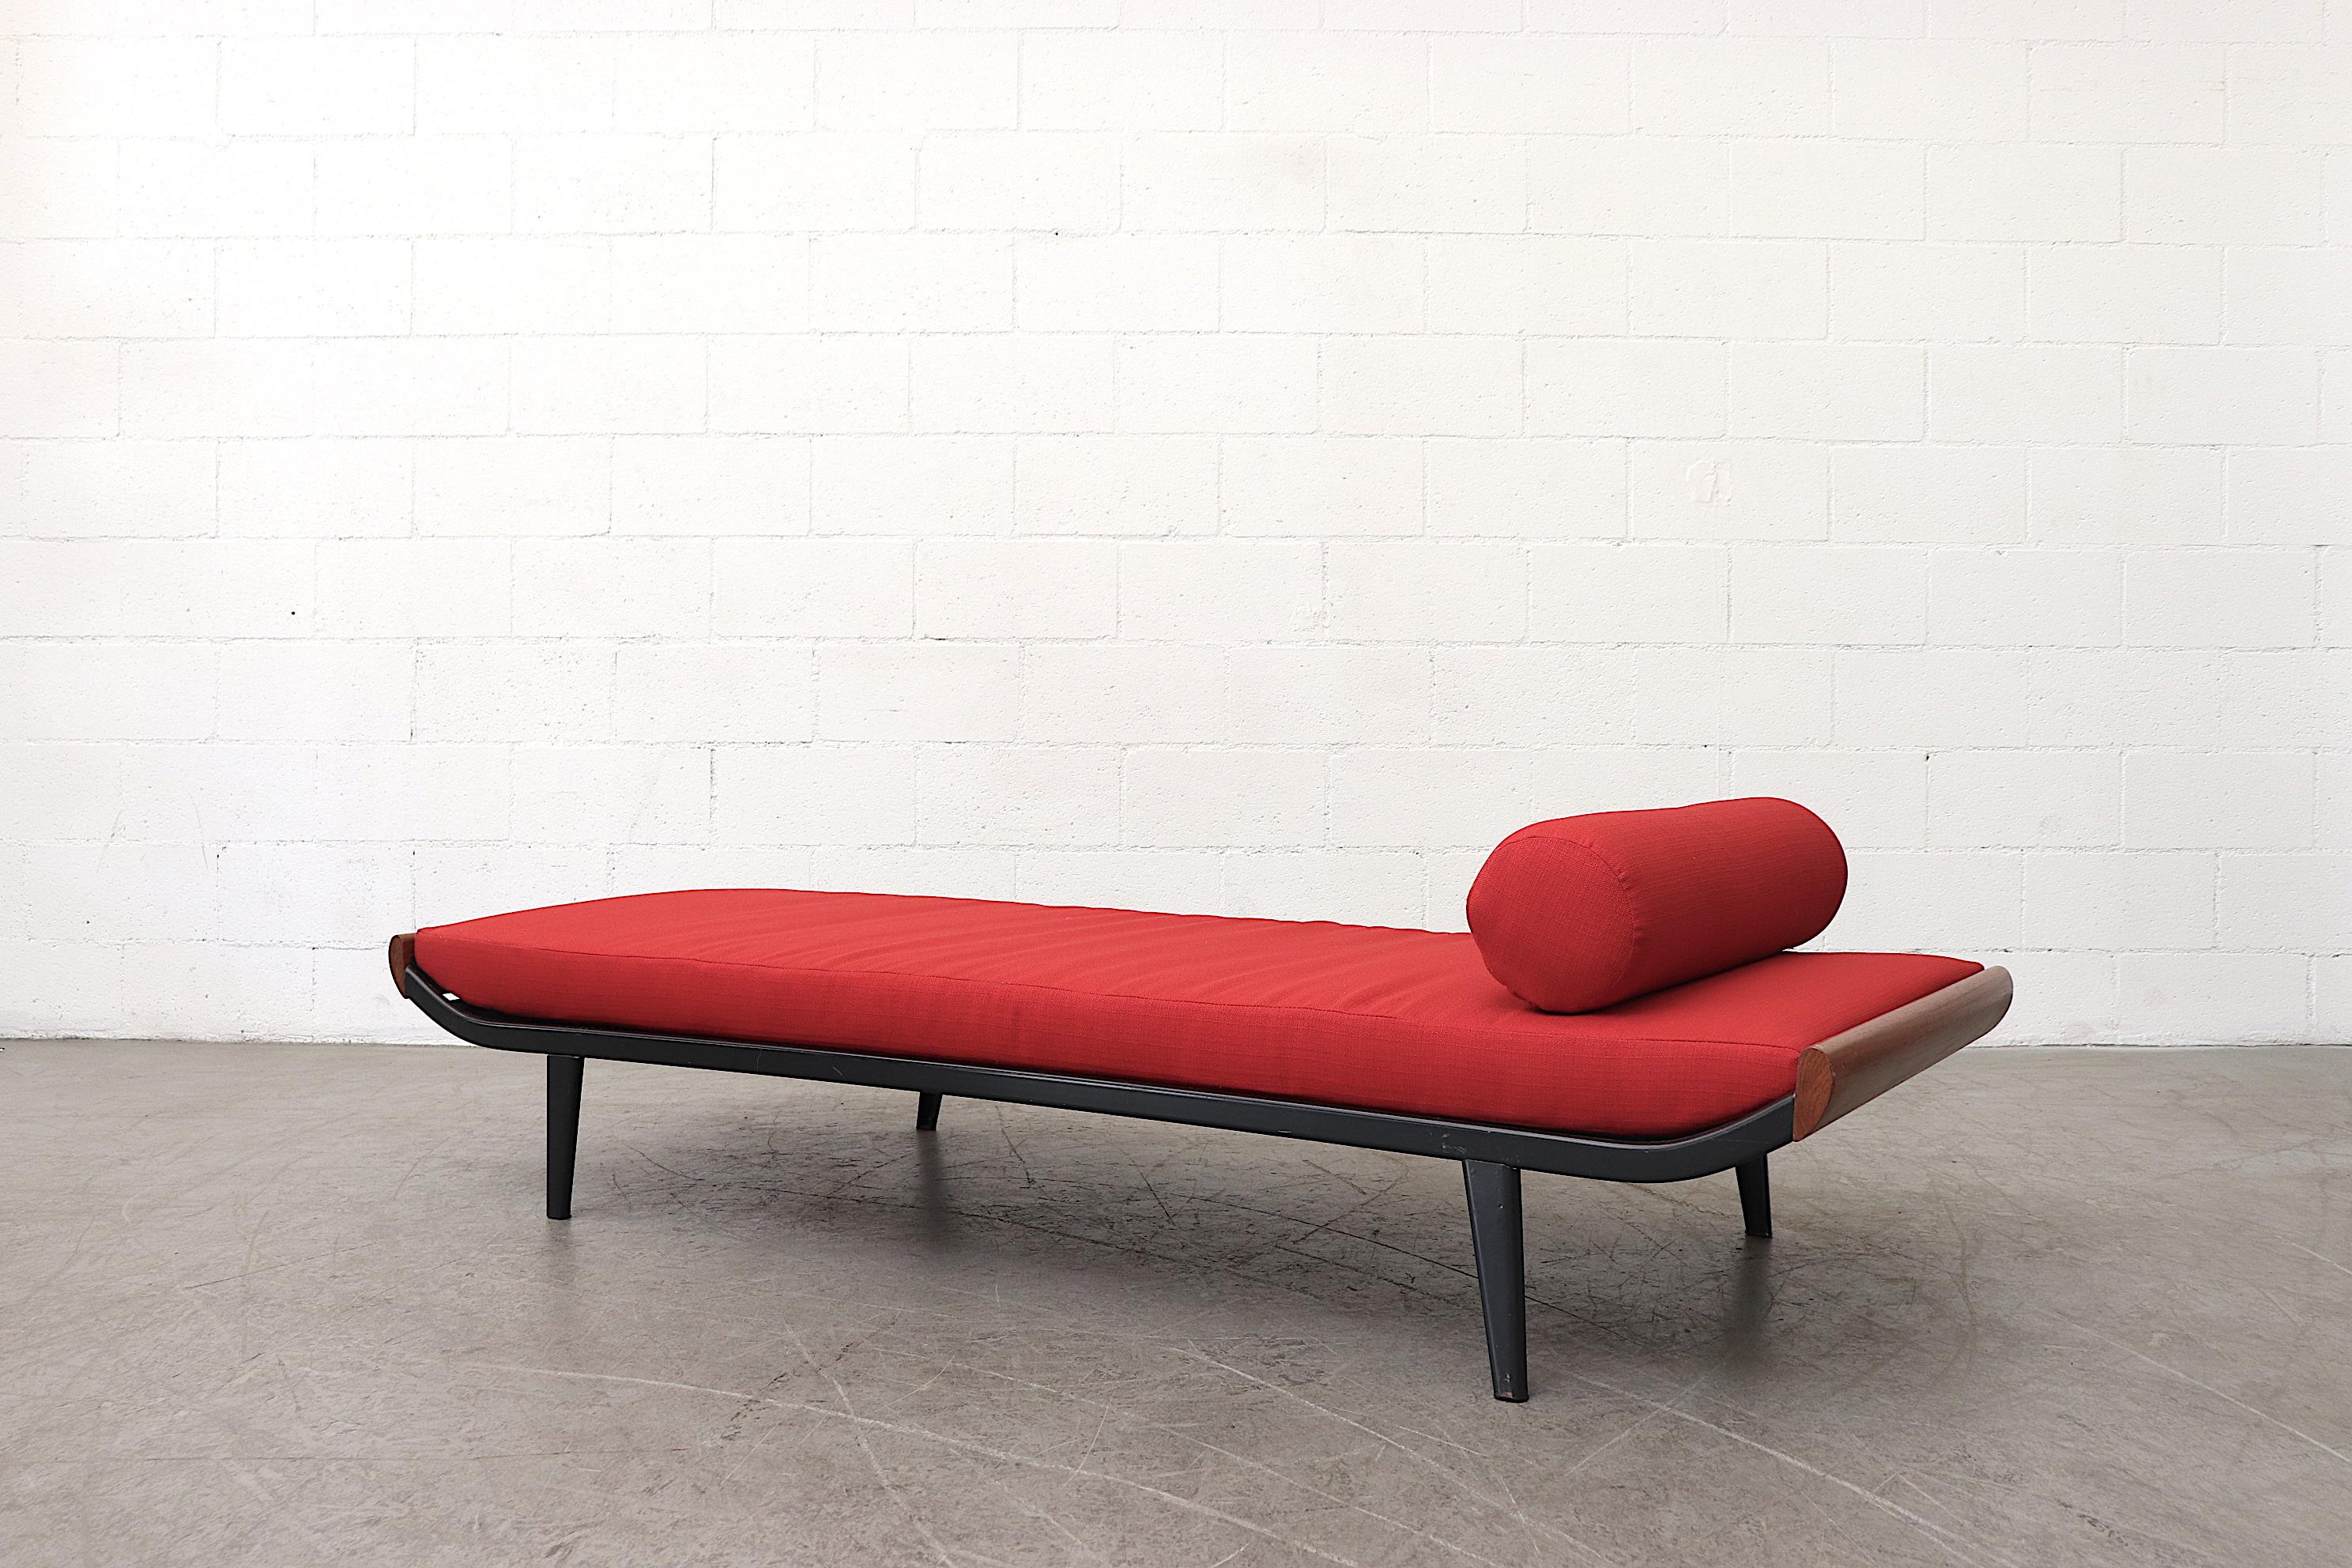 1960s Cleopatra daybed by A.R. Cordemeyer. Teak ends with dark enameled metal frame and new red upholstered mattress with matching bolster. Frame in original condition with expected wear. Frames may vary from the one pictured. Other sizes and color